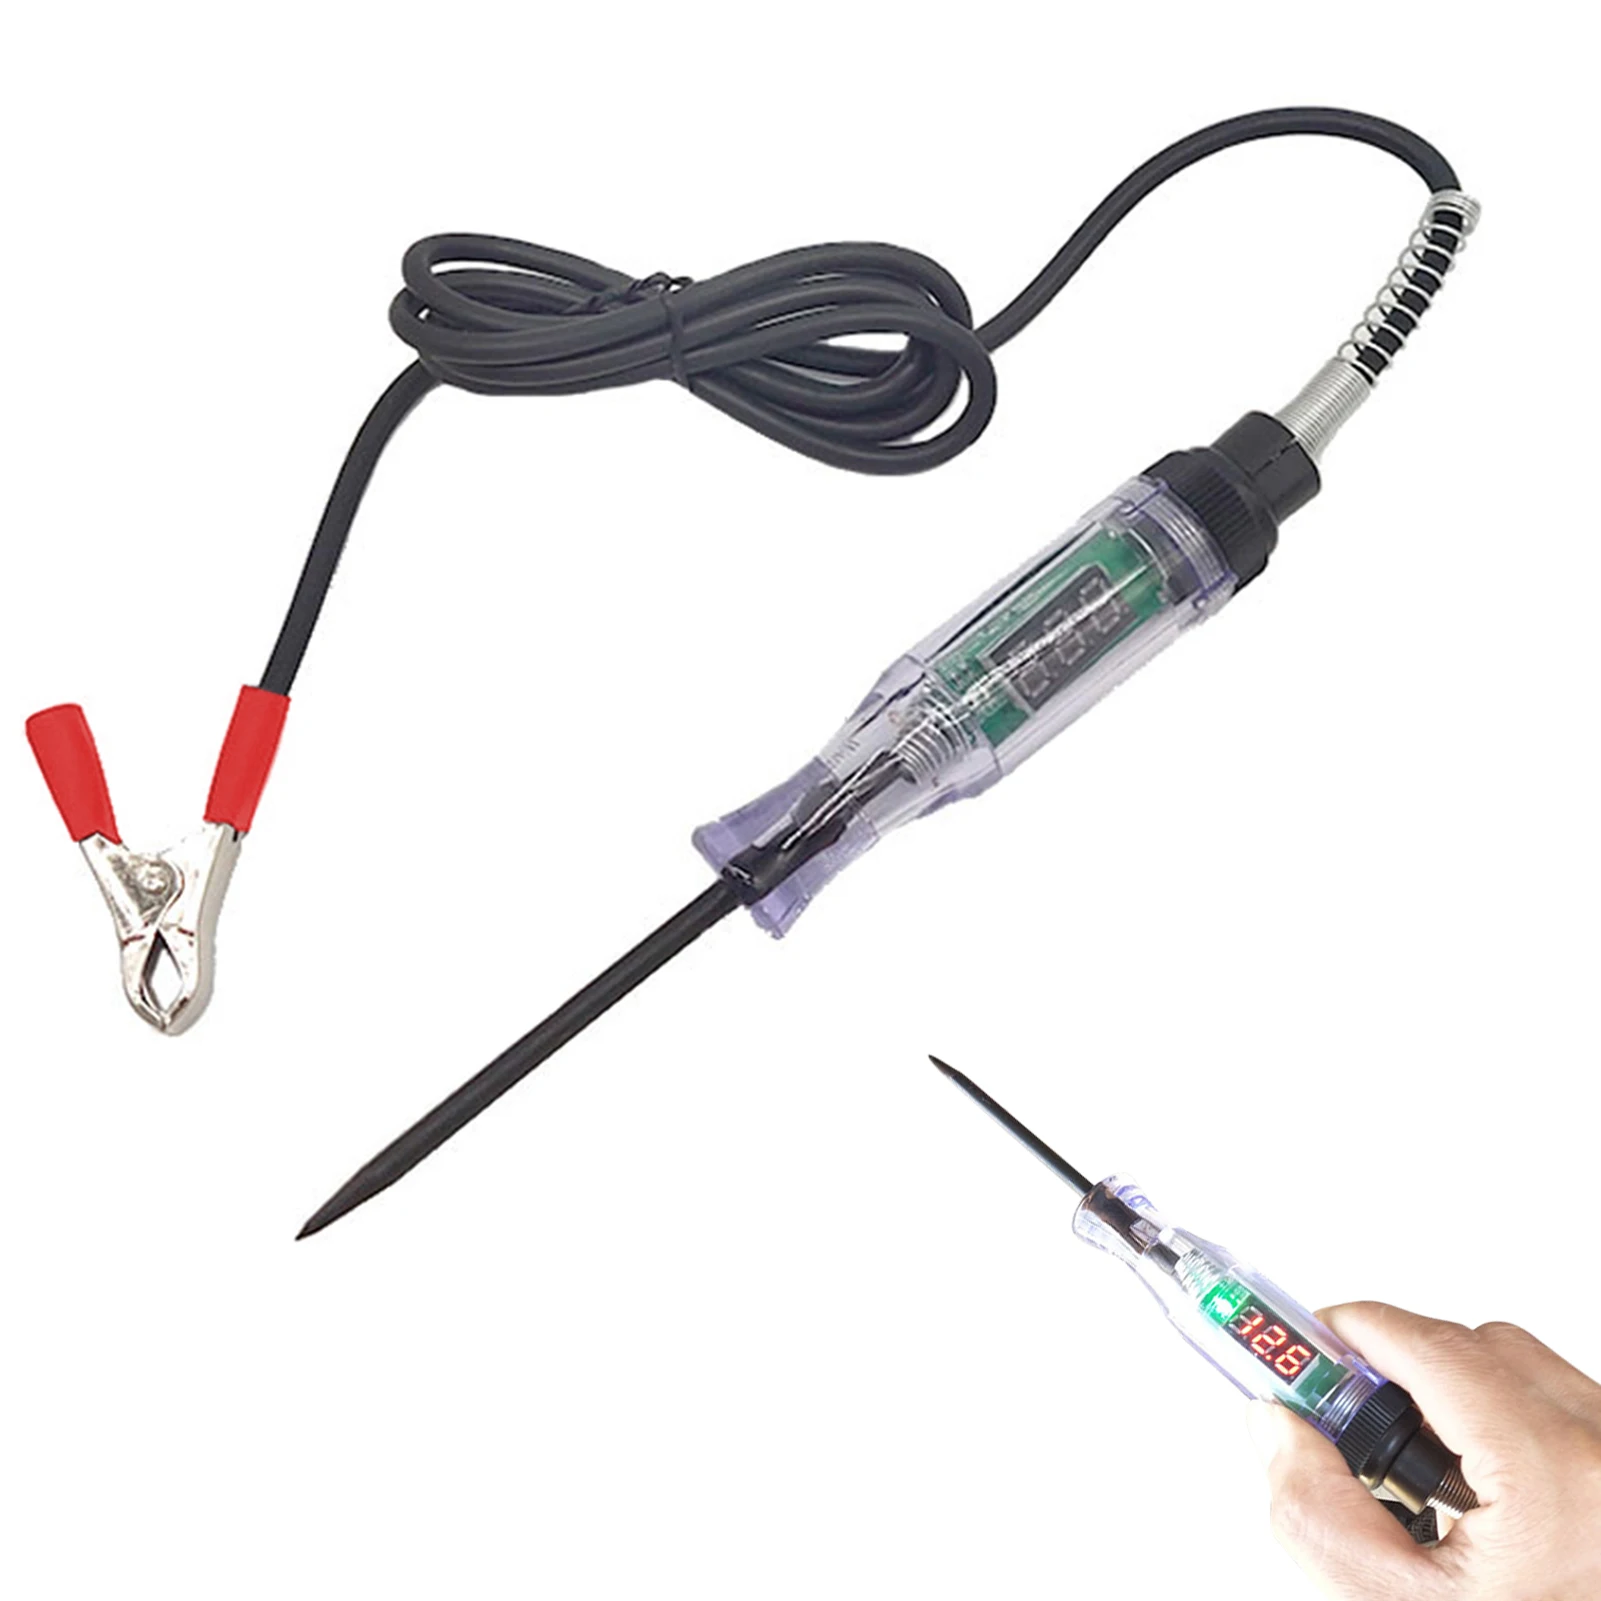 Backlit Digital LCD 3-48V Circuit Tester Car Truck Low Voltage & Automotive Test Light Tester Power Measuring Pen multifunction car circuit tester handy electrical test pen for quick accurate dropshipping